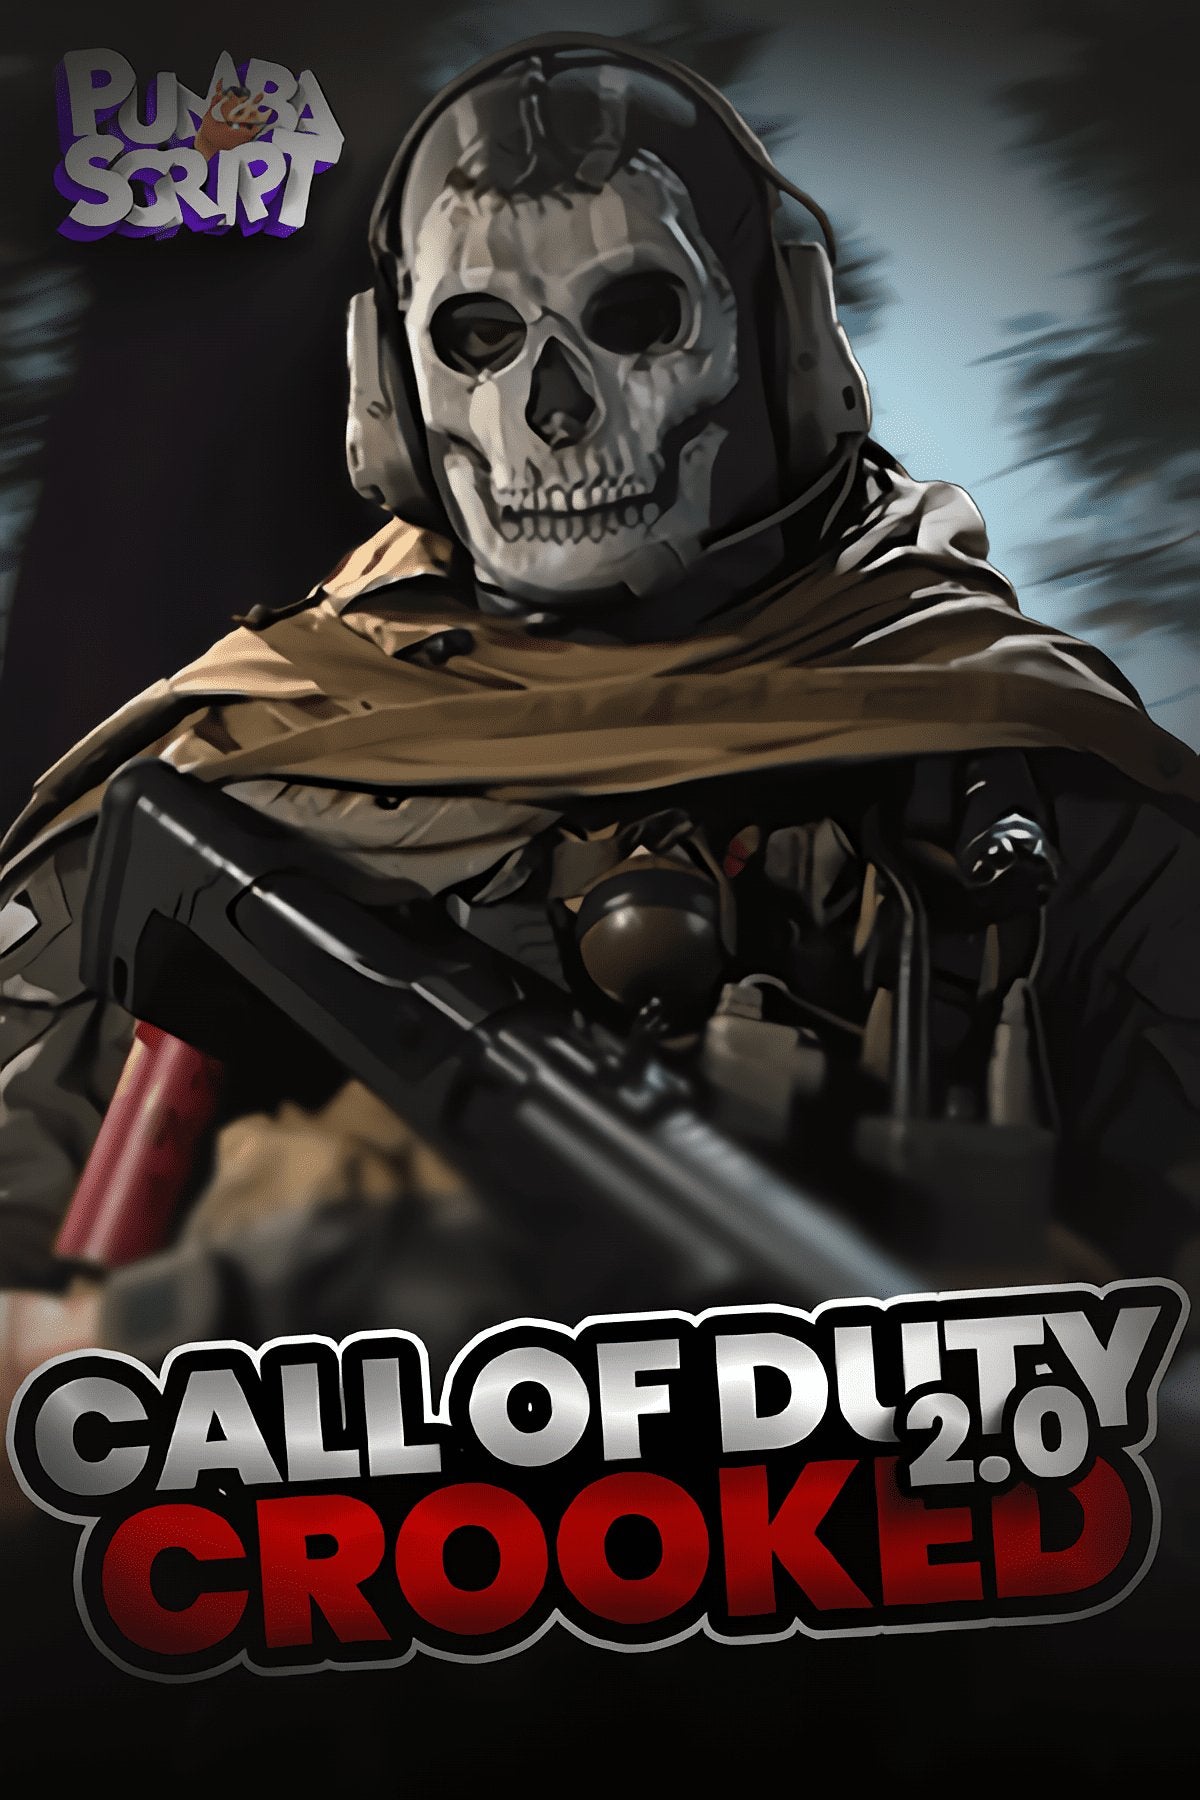 CALL OF DUTY 3.0 & MW3 CROOKED